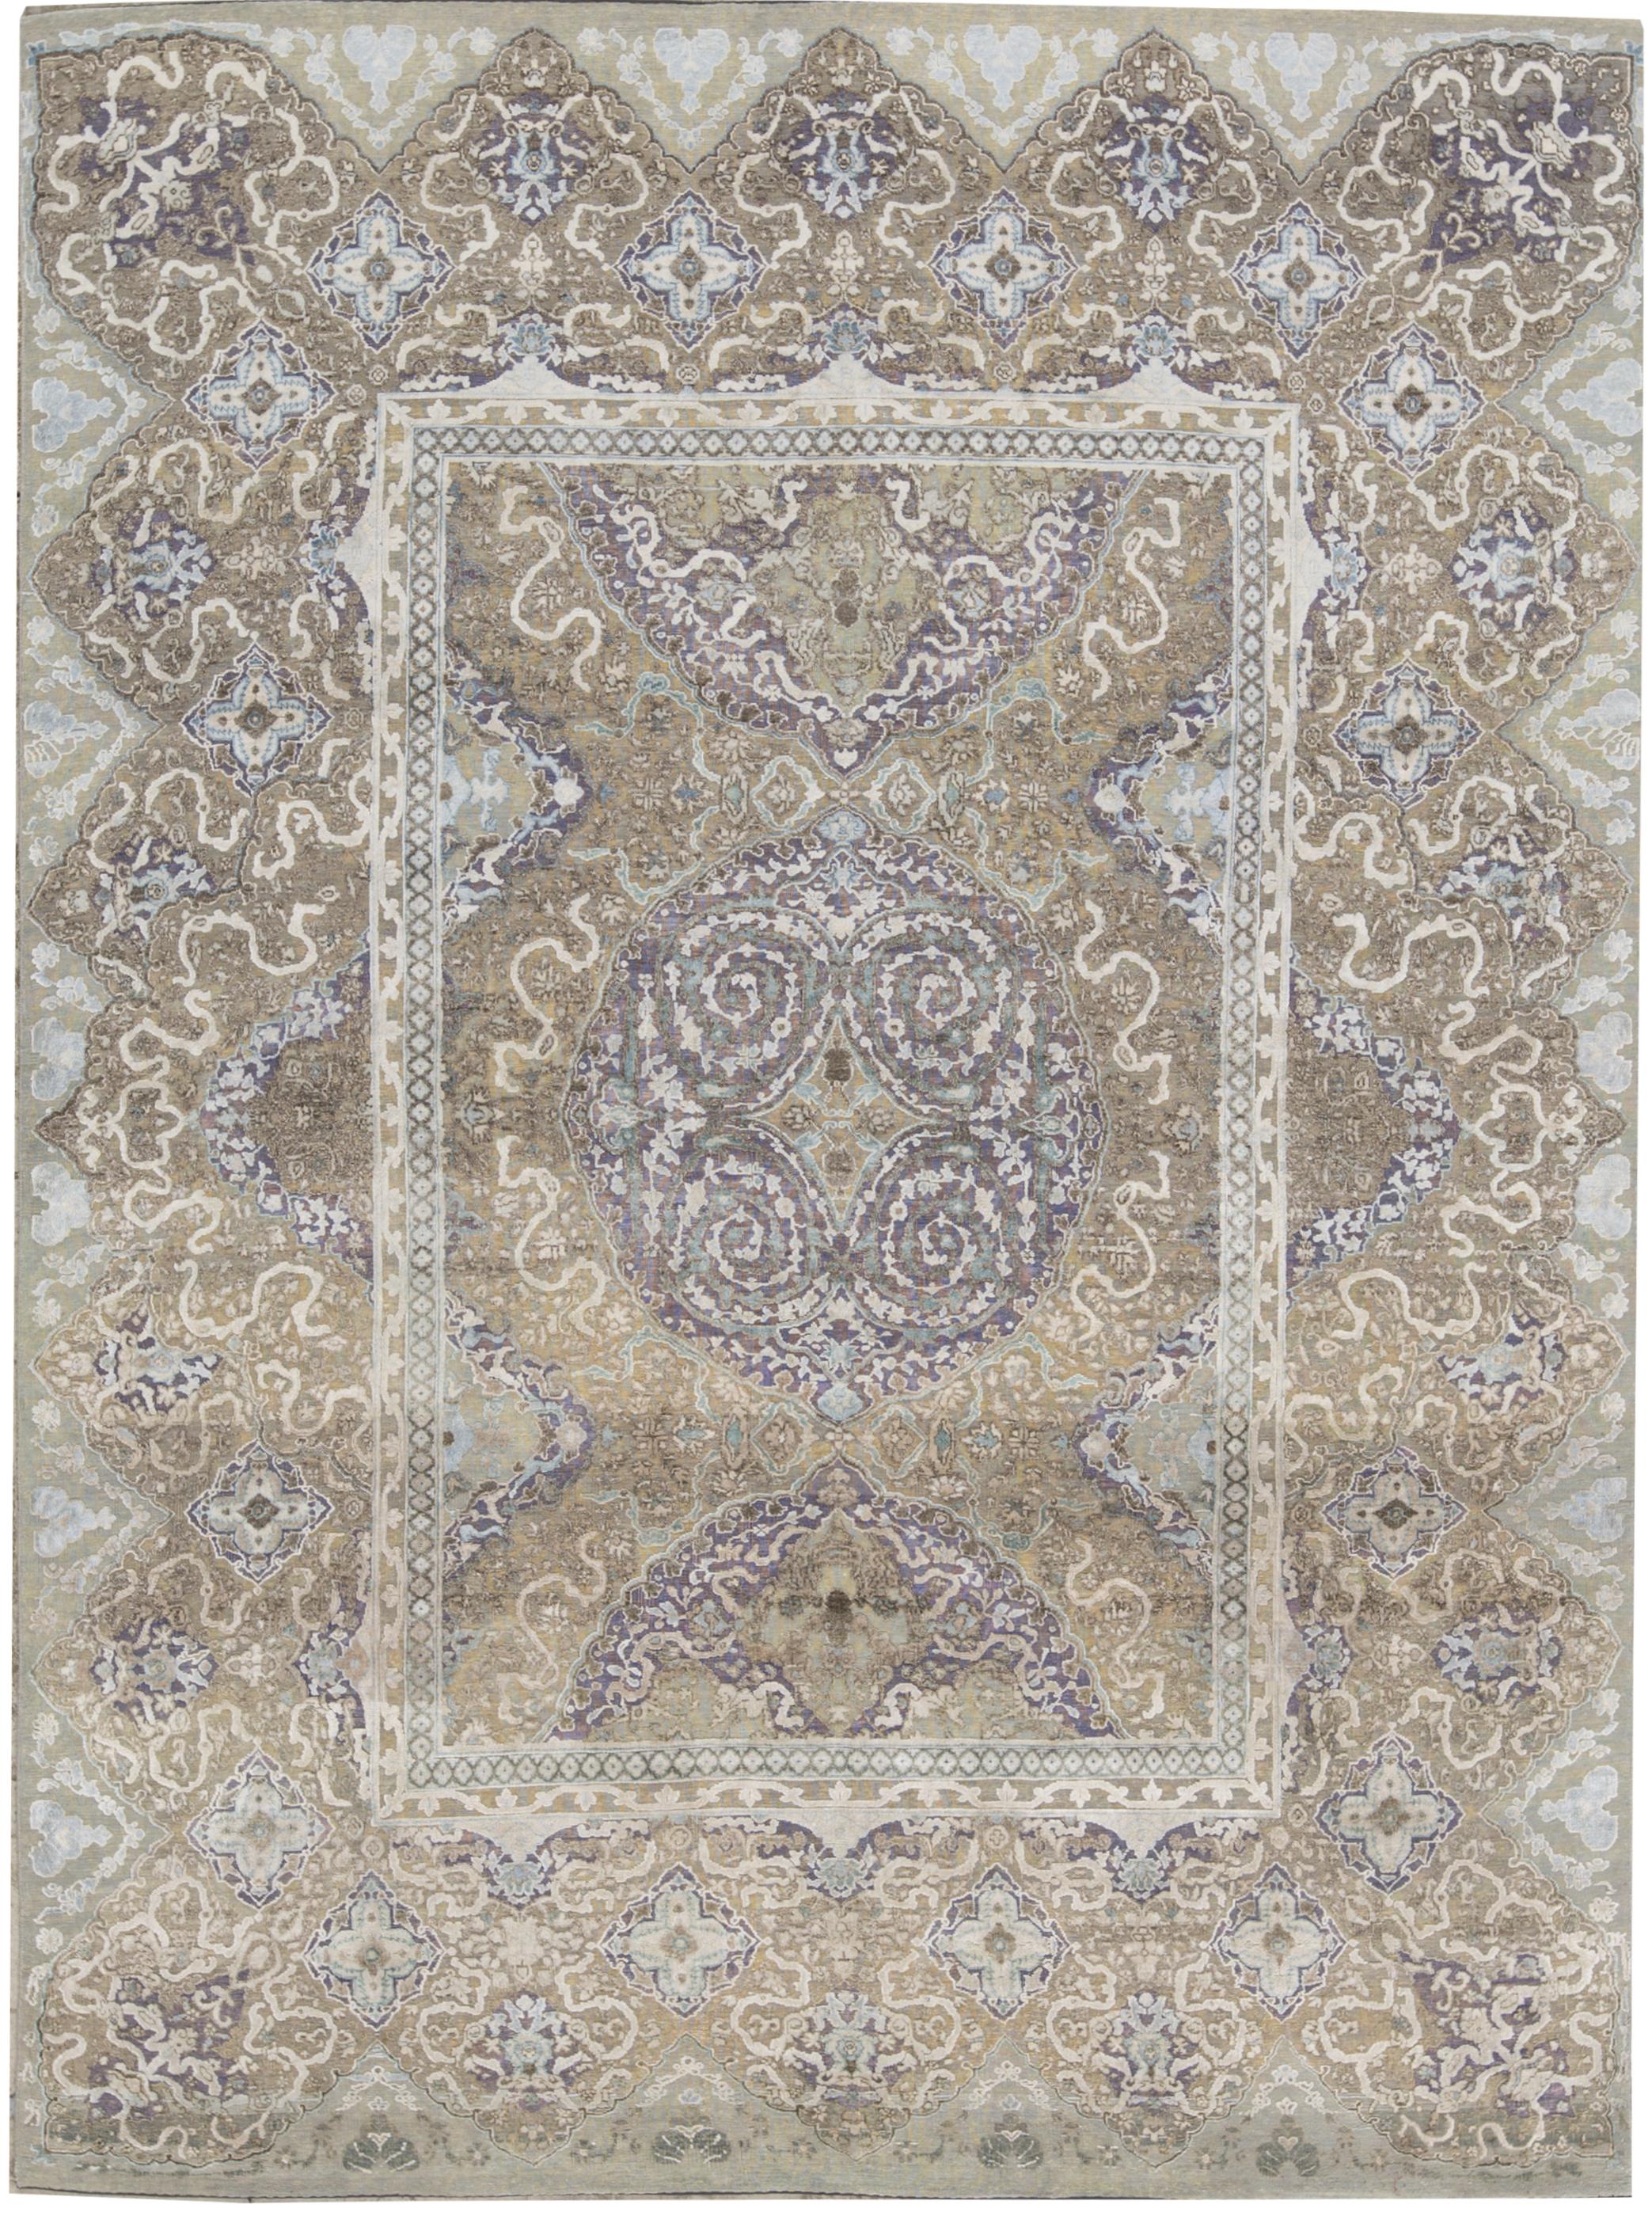 Hand-Woven One of a Kind Transitional Handwoven Wool Area Rug  7'9 x 10'6 For Sale